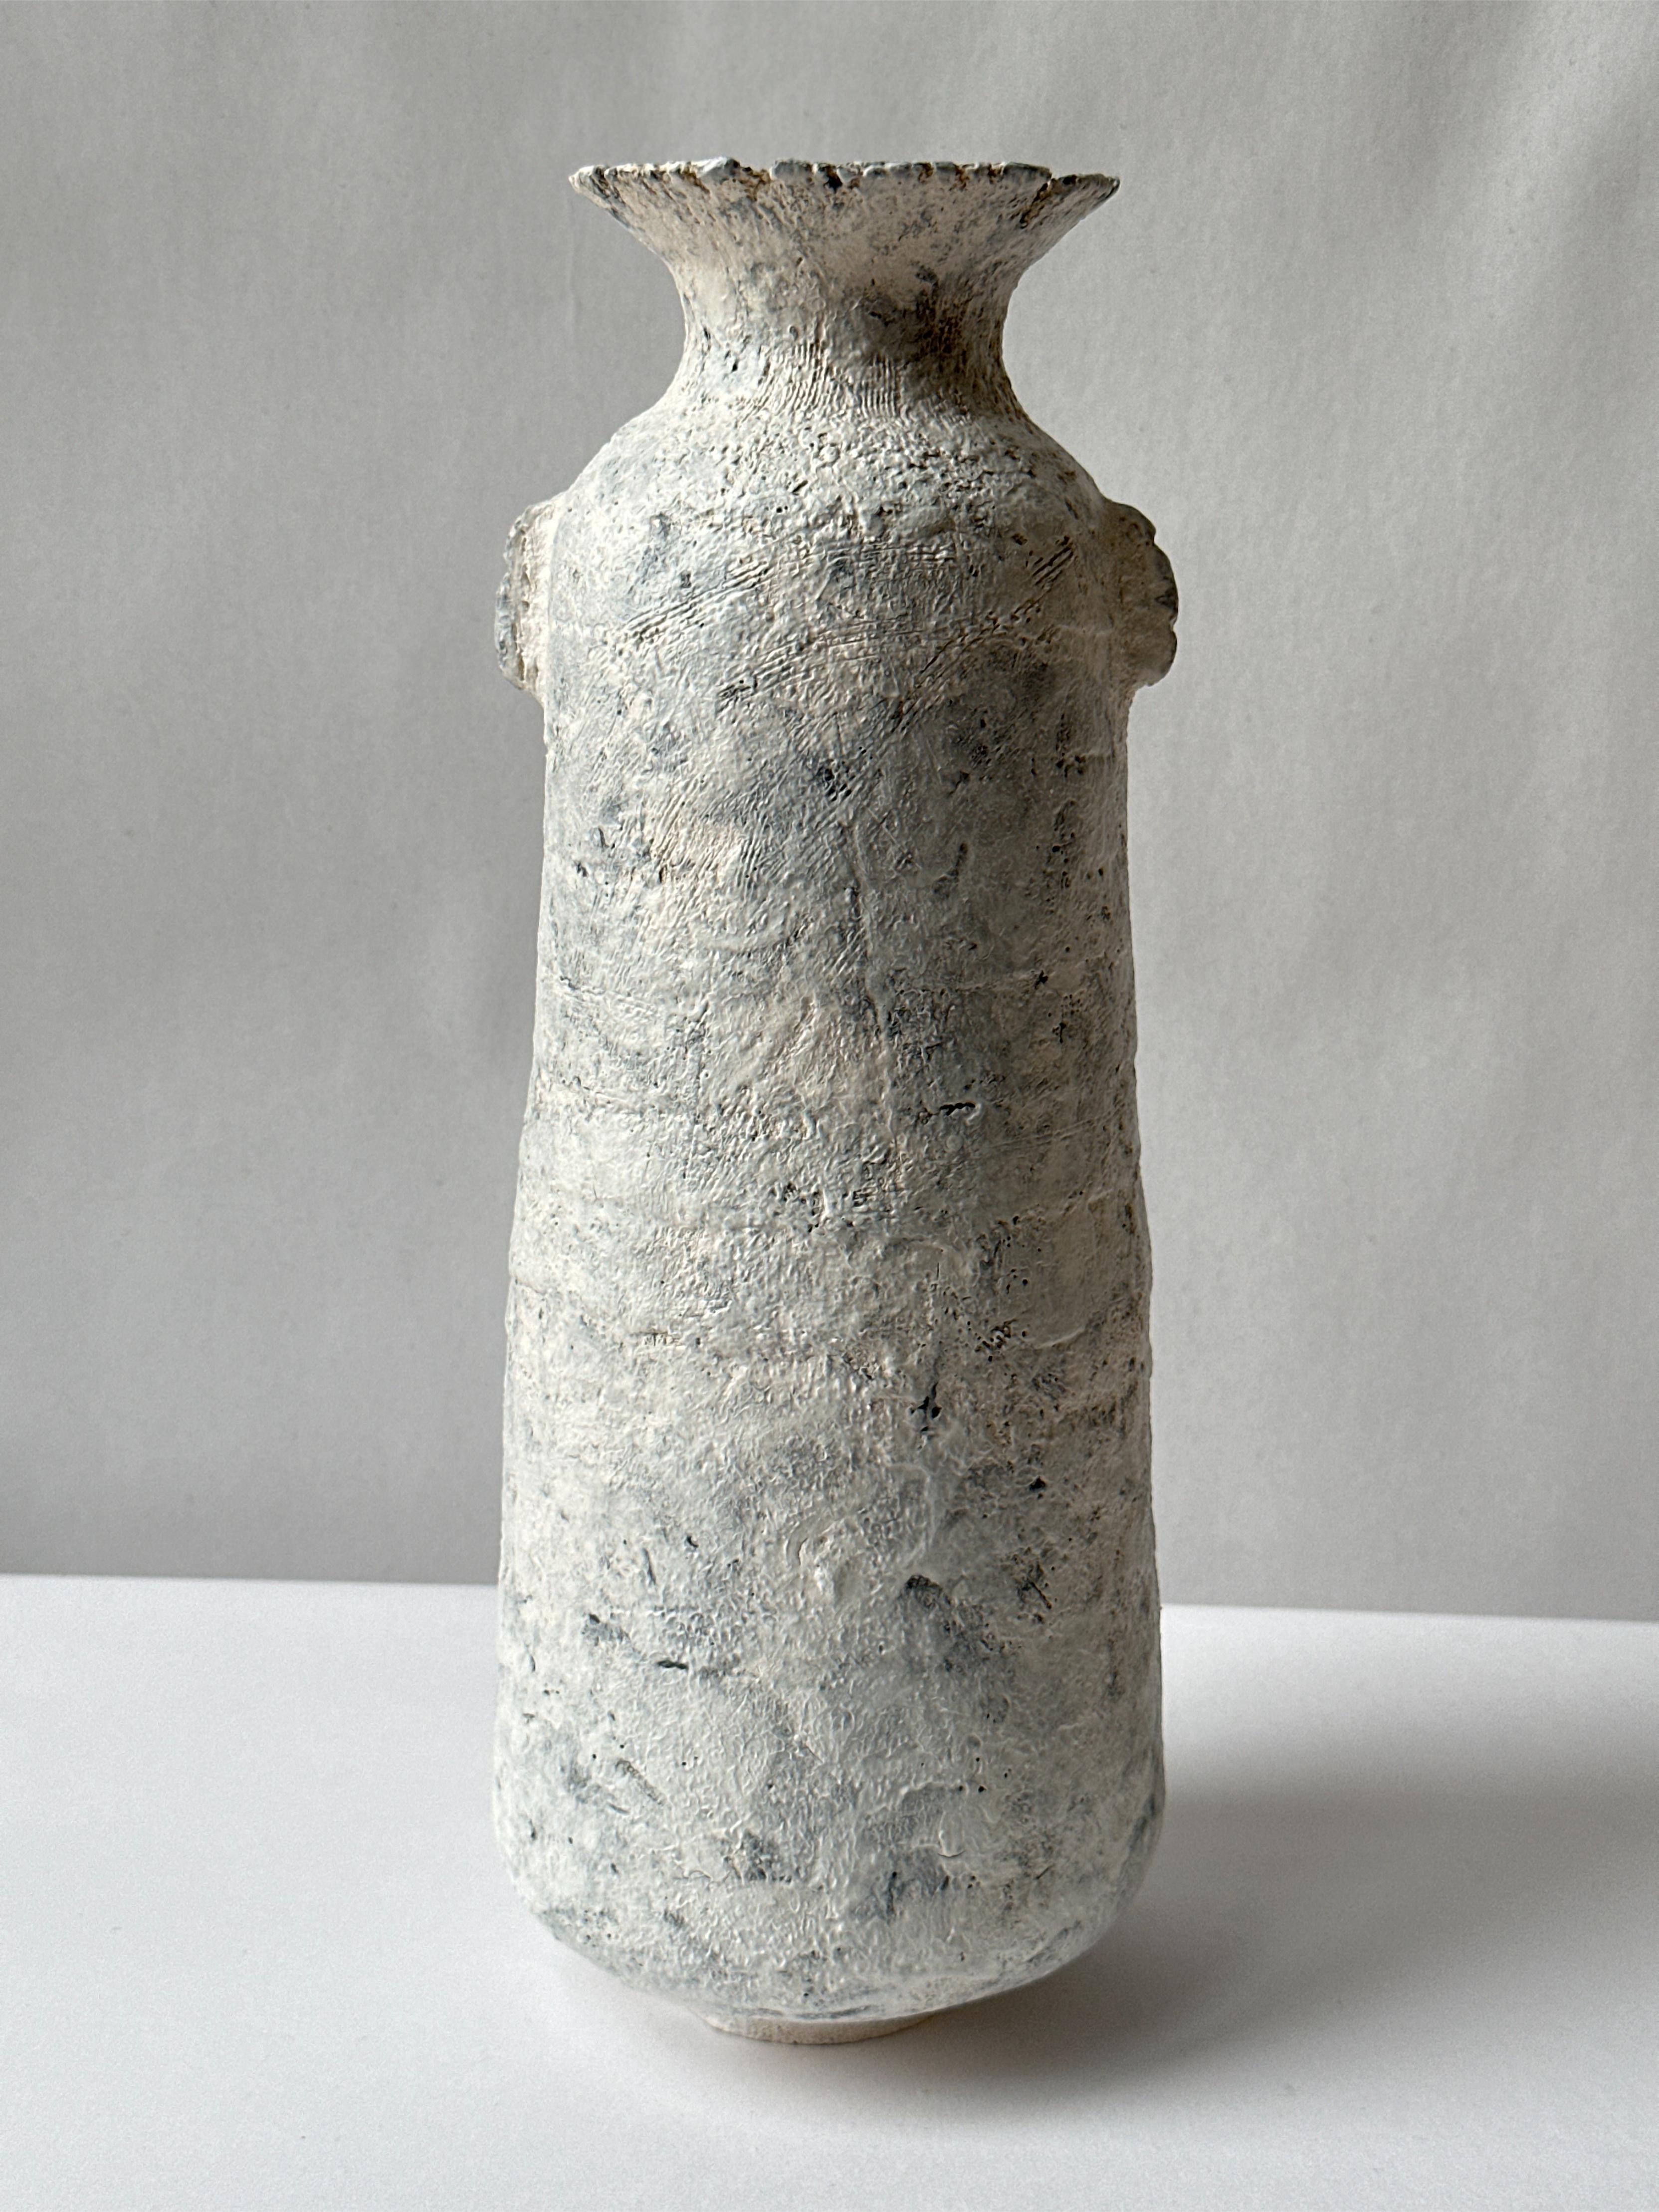 White Stoneware Alavastron Vase by Elena Vasilantonaki
Unique
Dimensions: ⌀ 20 x H 40 cm (Dimensions may vary)
Materials: Stoneware
Available finishes: White, Red, Black, Brown, Black, White Patina

Growing up in Greece I was surrounded by pottery